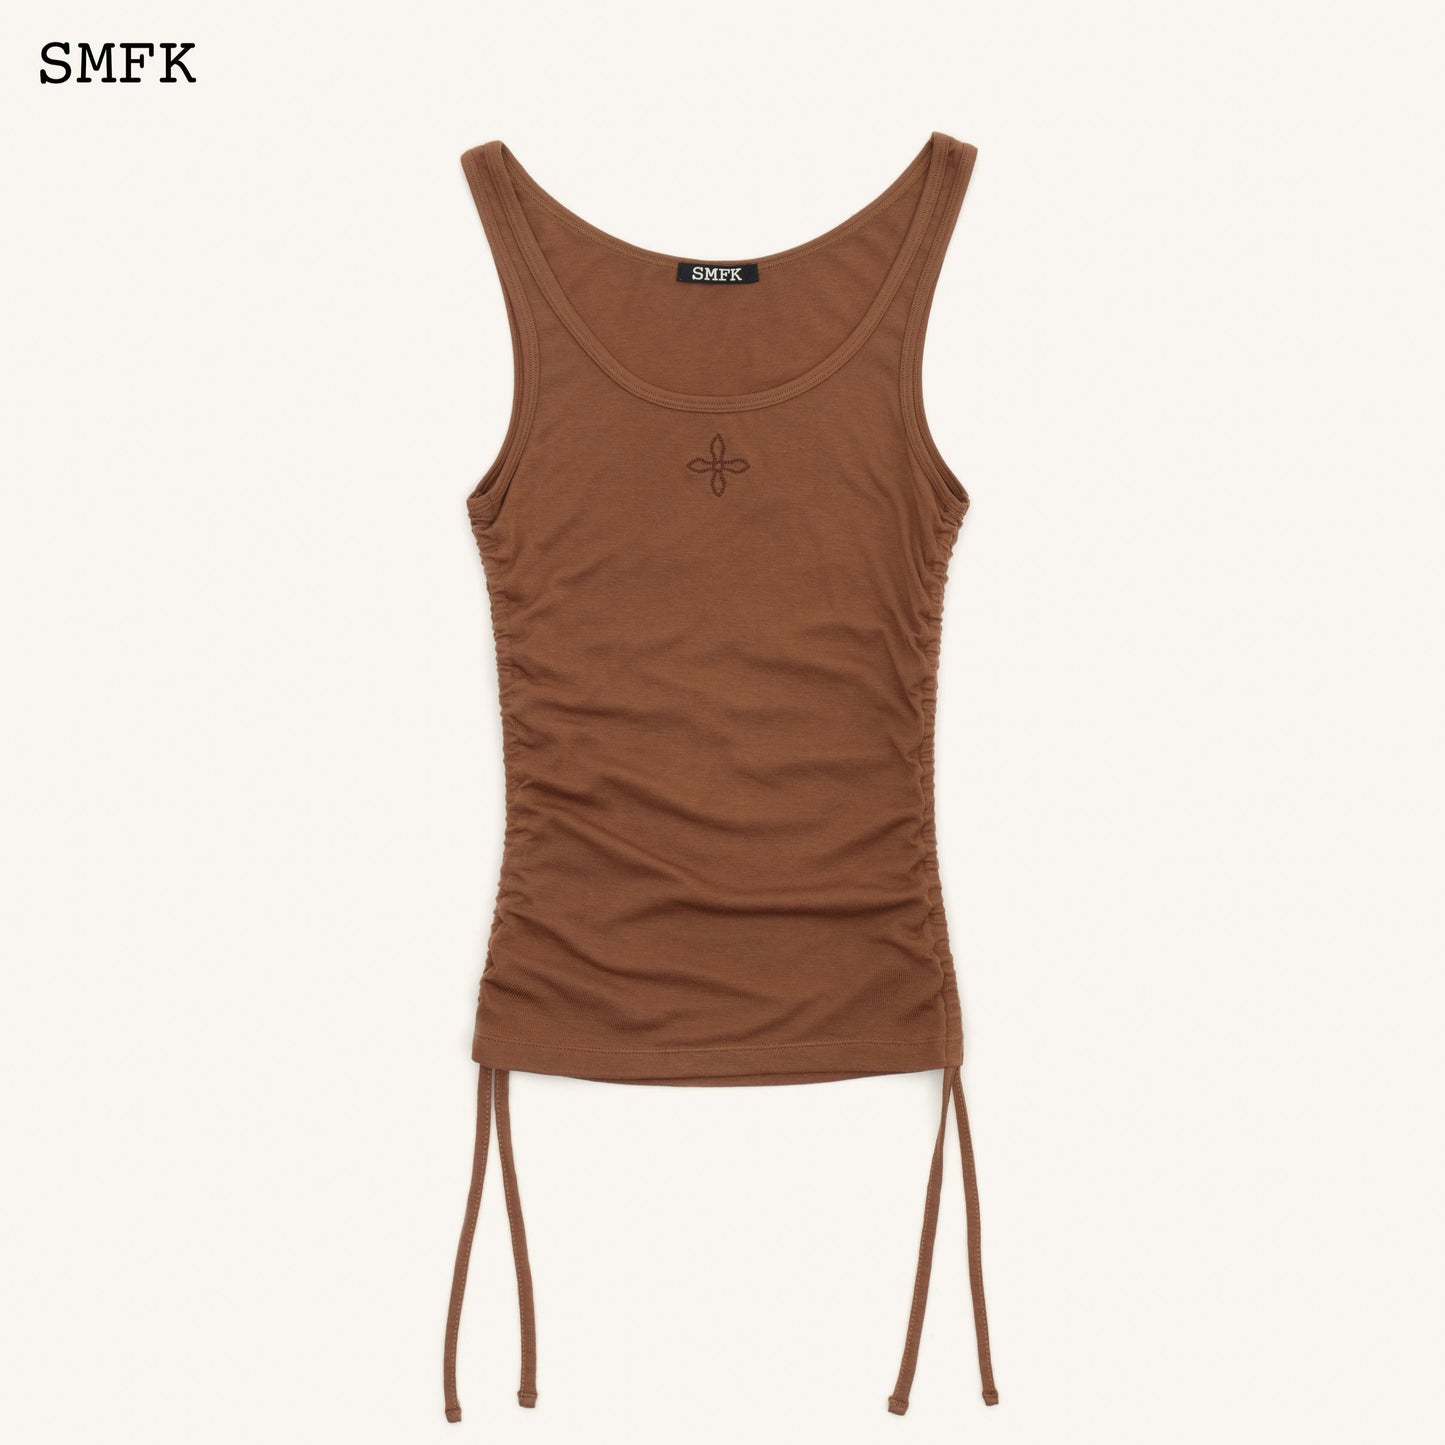 SMFK Compass Classic Shutter Sporty Vest In Brown